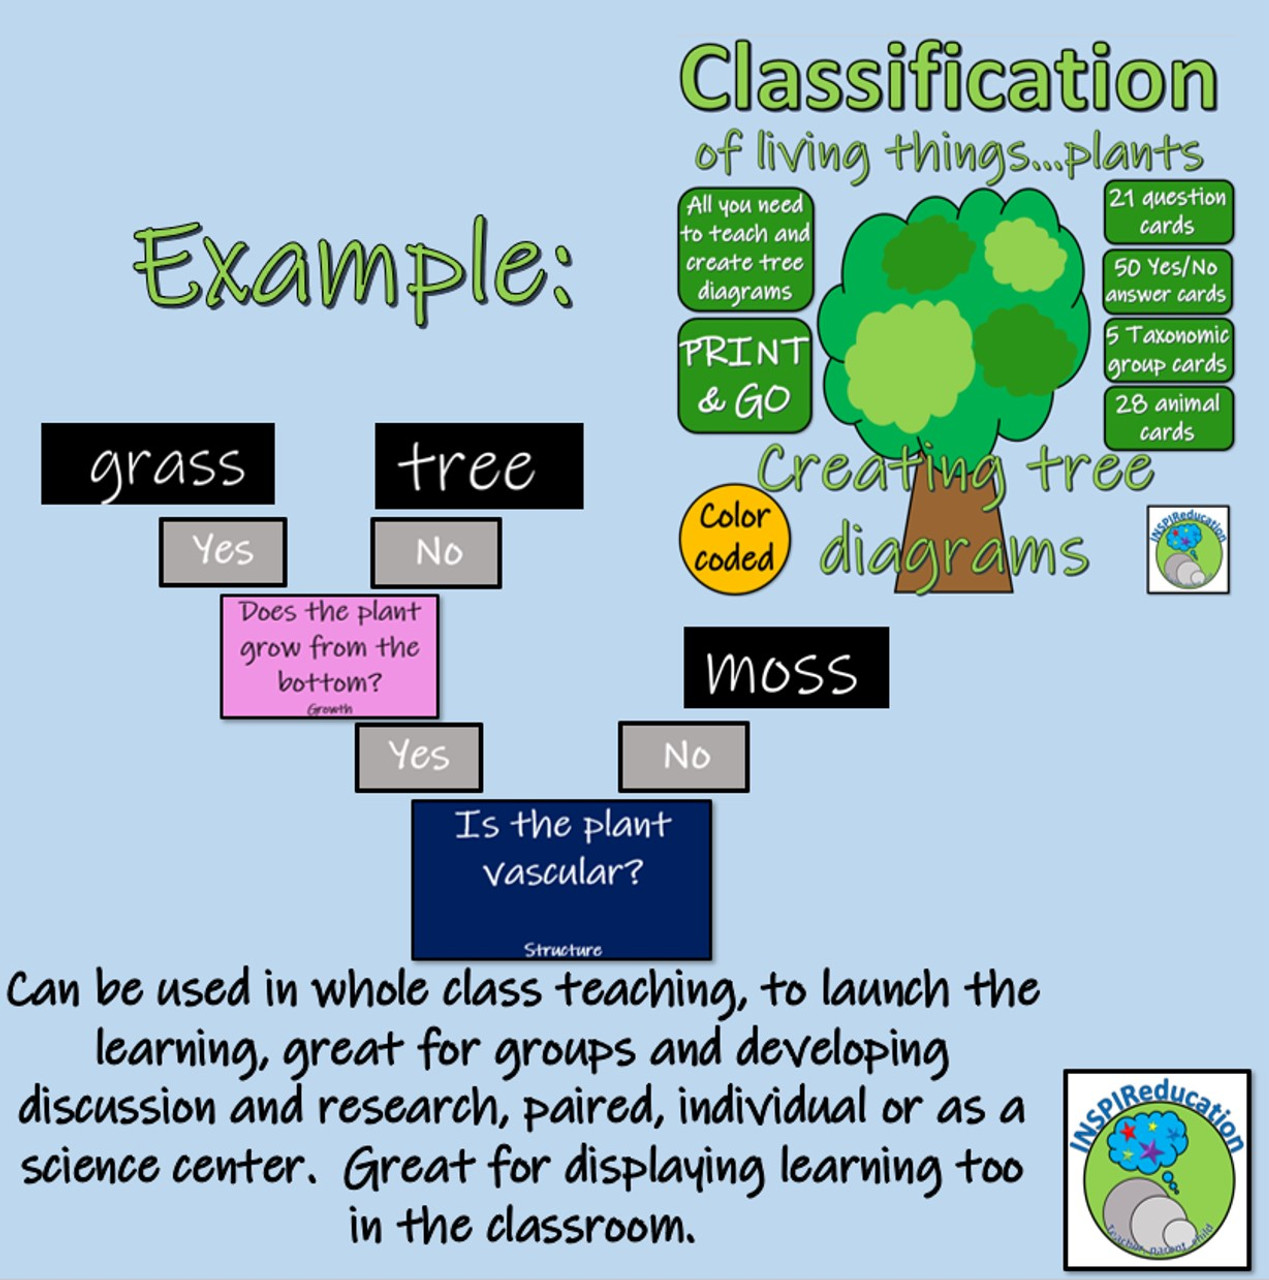 Classification of Green Plants - Decision Trees (Yes/No) Questions - Branch diagrams